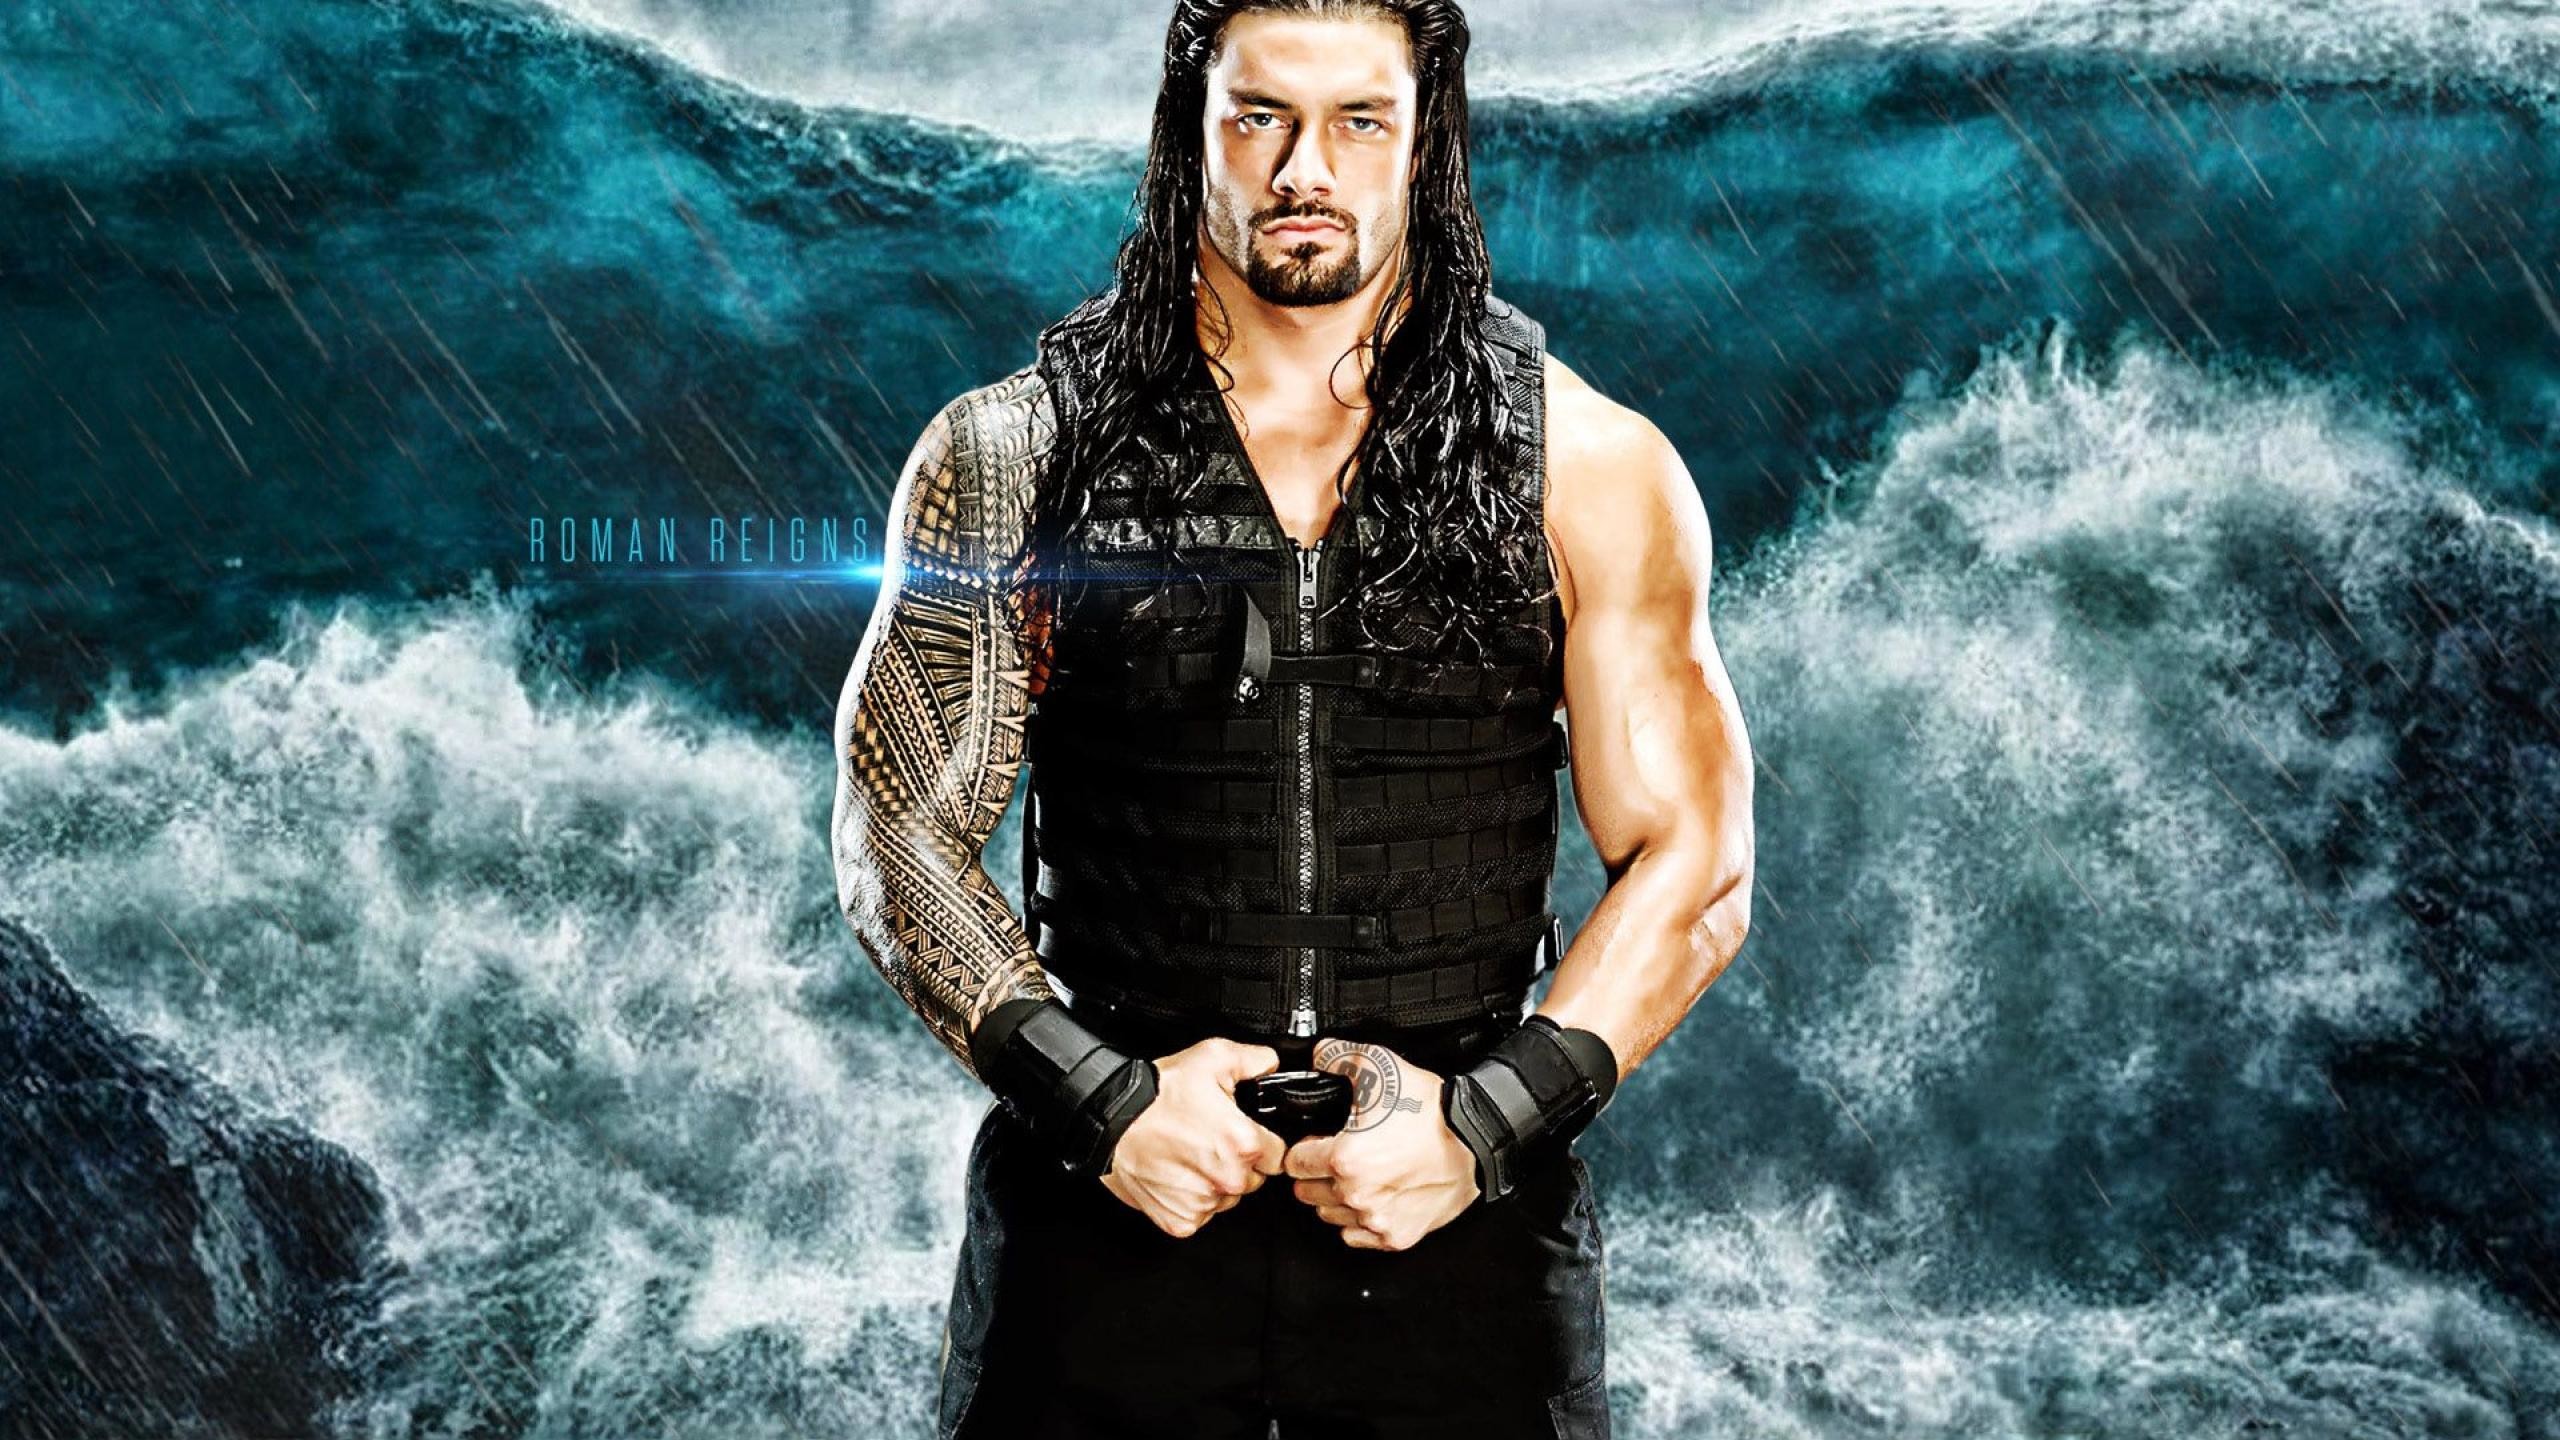 Sky Blue India Elegant HD Poster of Roman Reigns for Gym and Wall  Decoration Size 12  18 inch 300 GSM Thick Paper  Amazonin घर और कचन